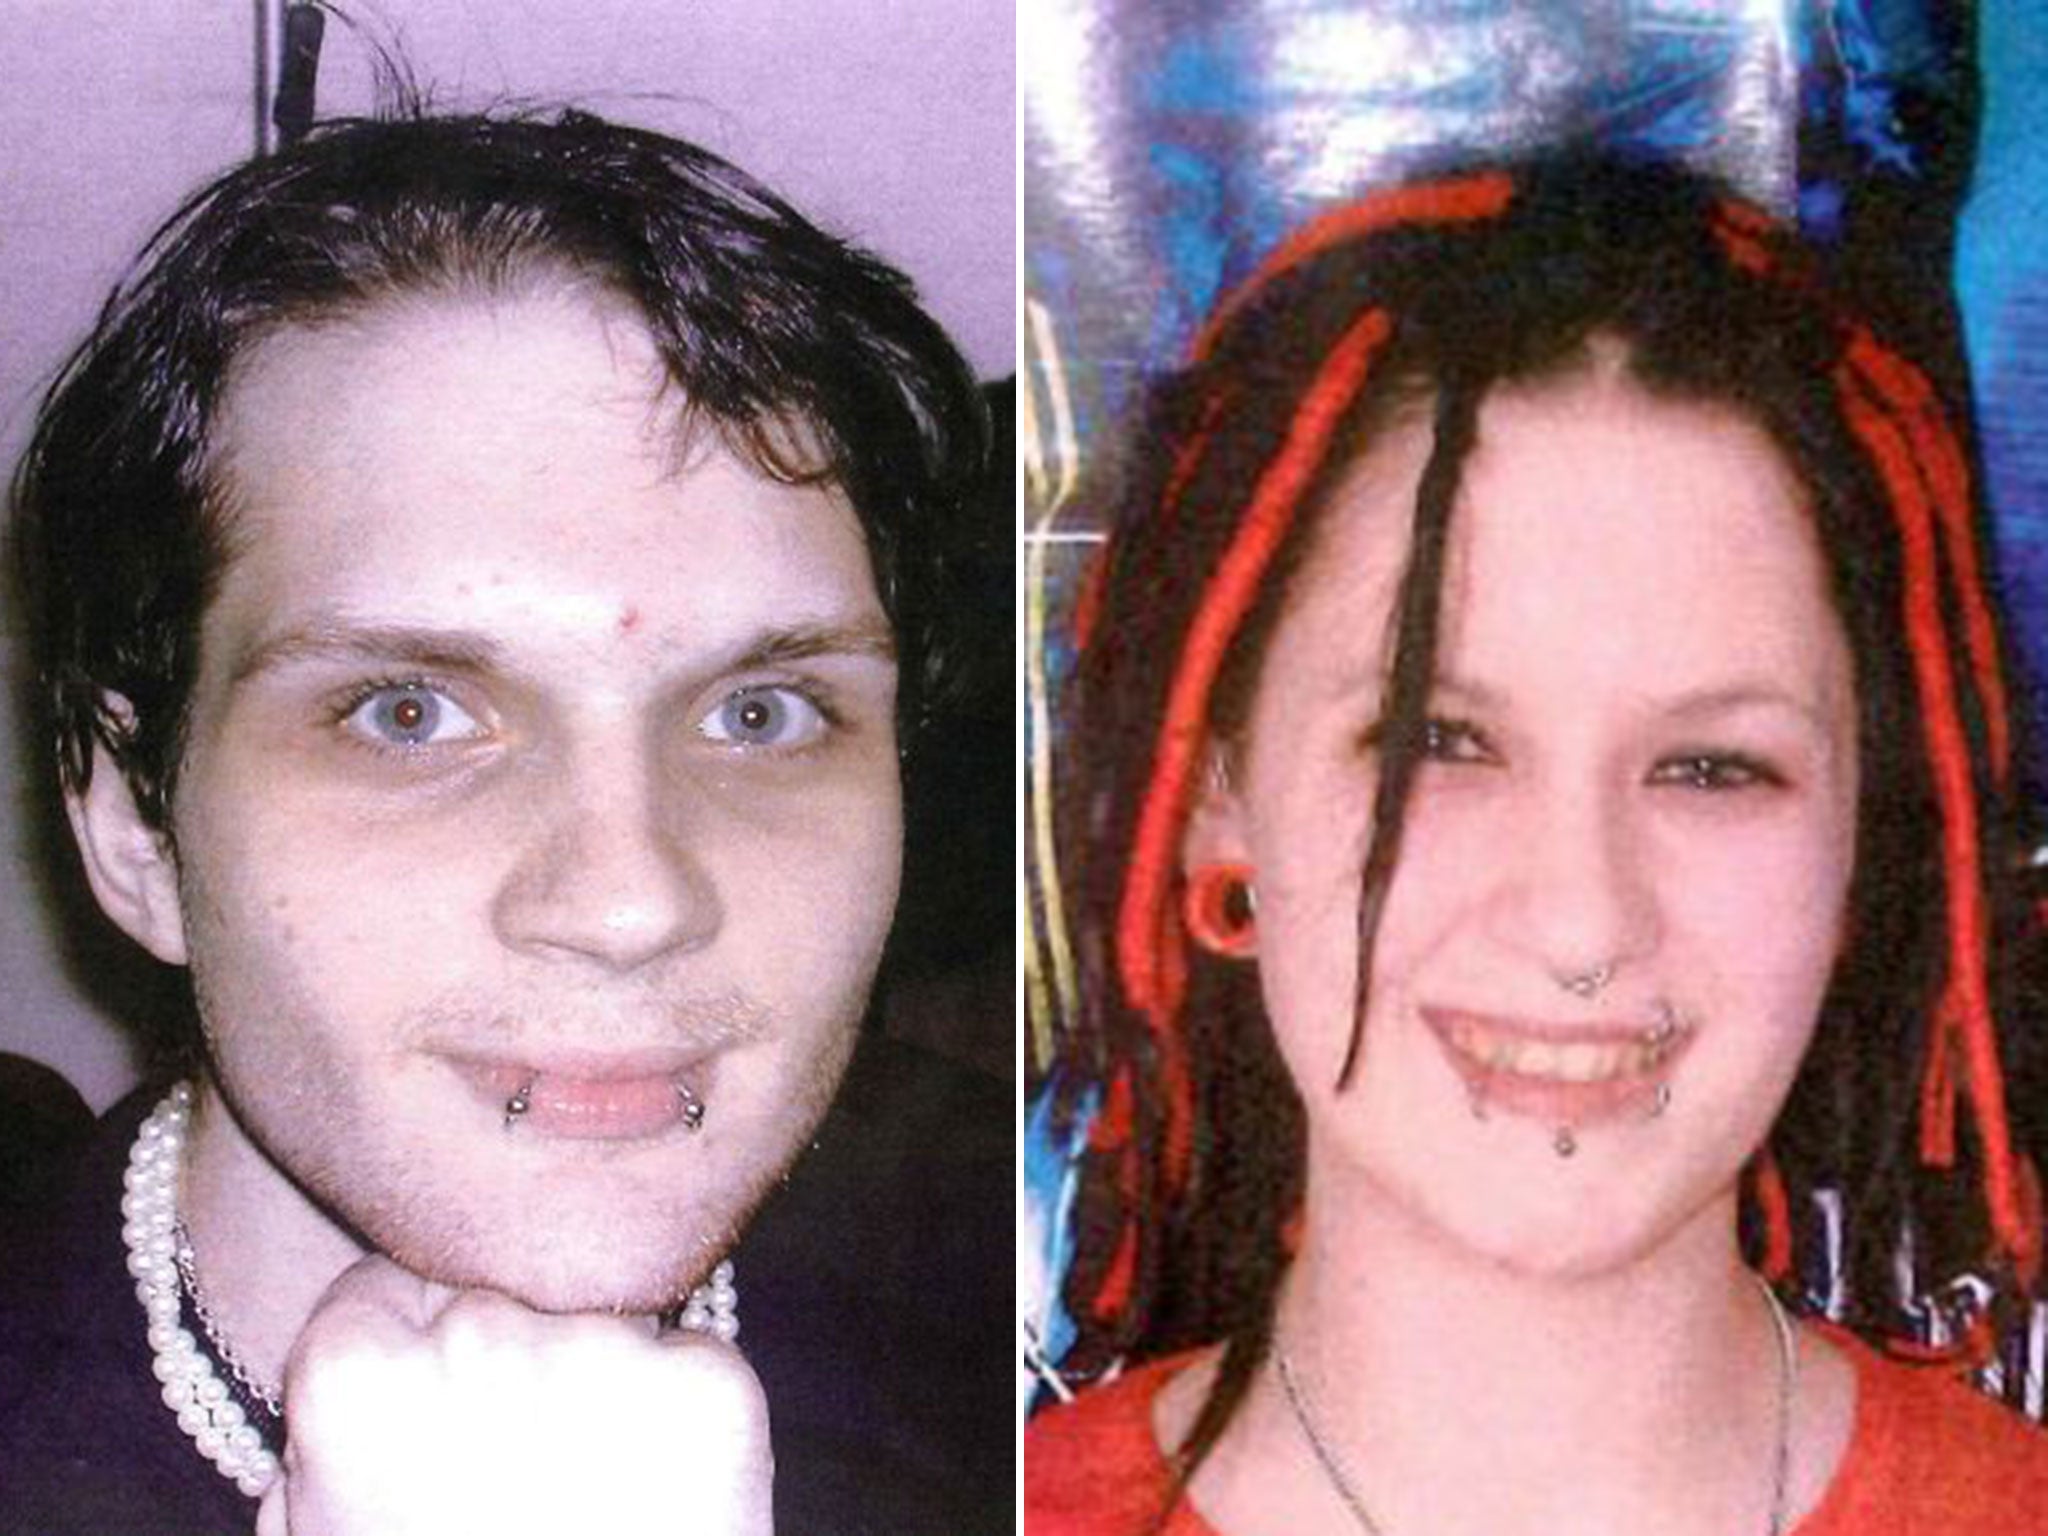 Sophie Lancaster, killed at 20 for being a goth, and her boyfriend (not the pair allegedly attacked last week)